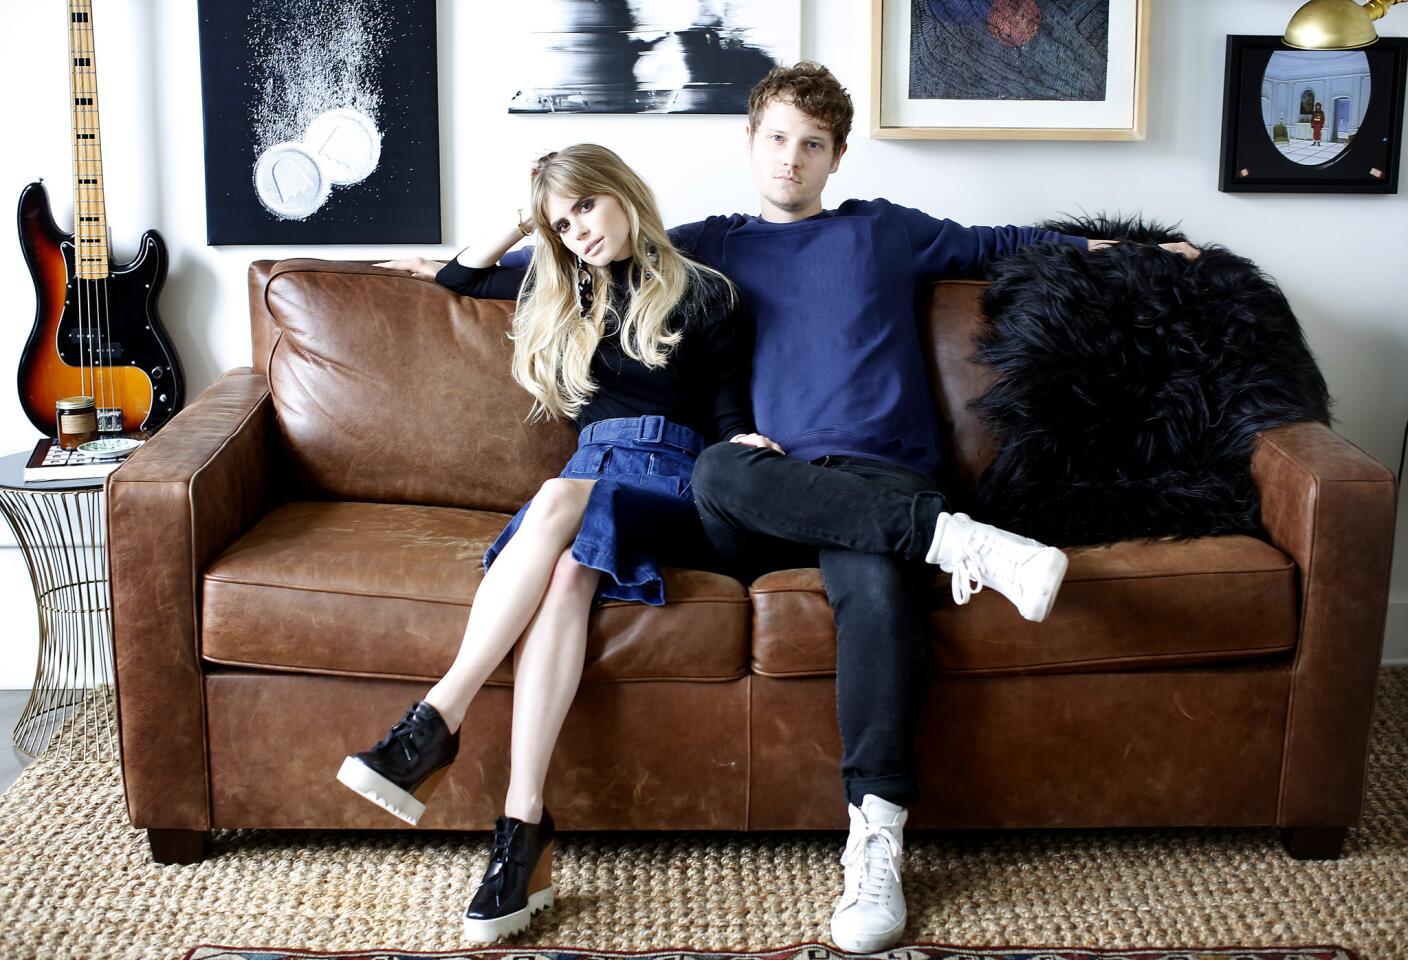 Tour Carlson Young and Isom Innis' DTLA loft